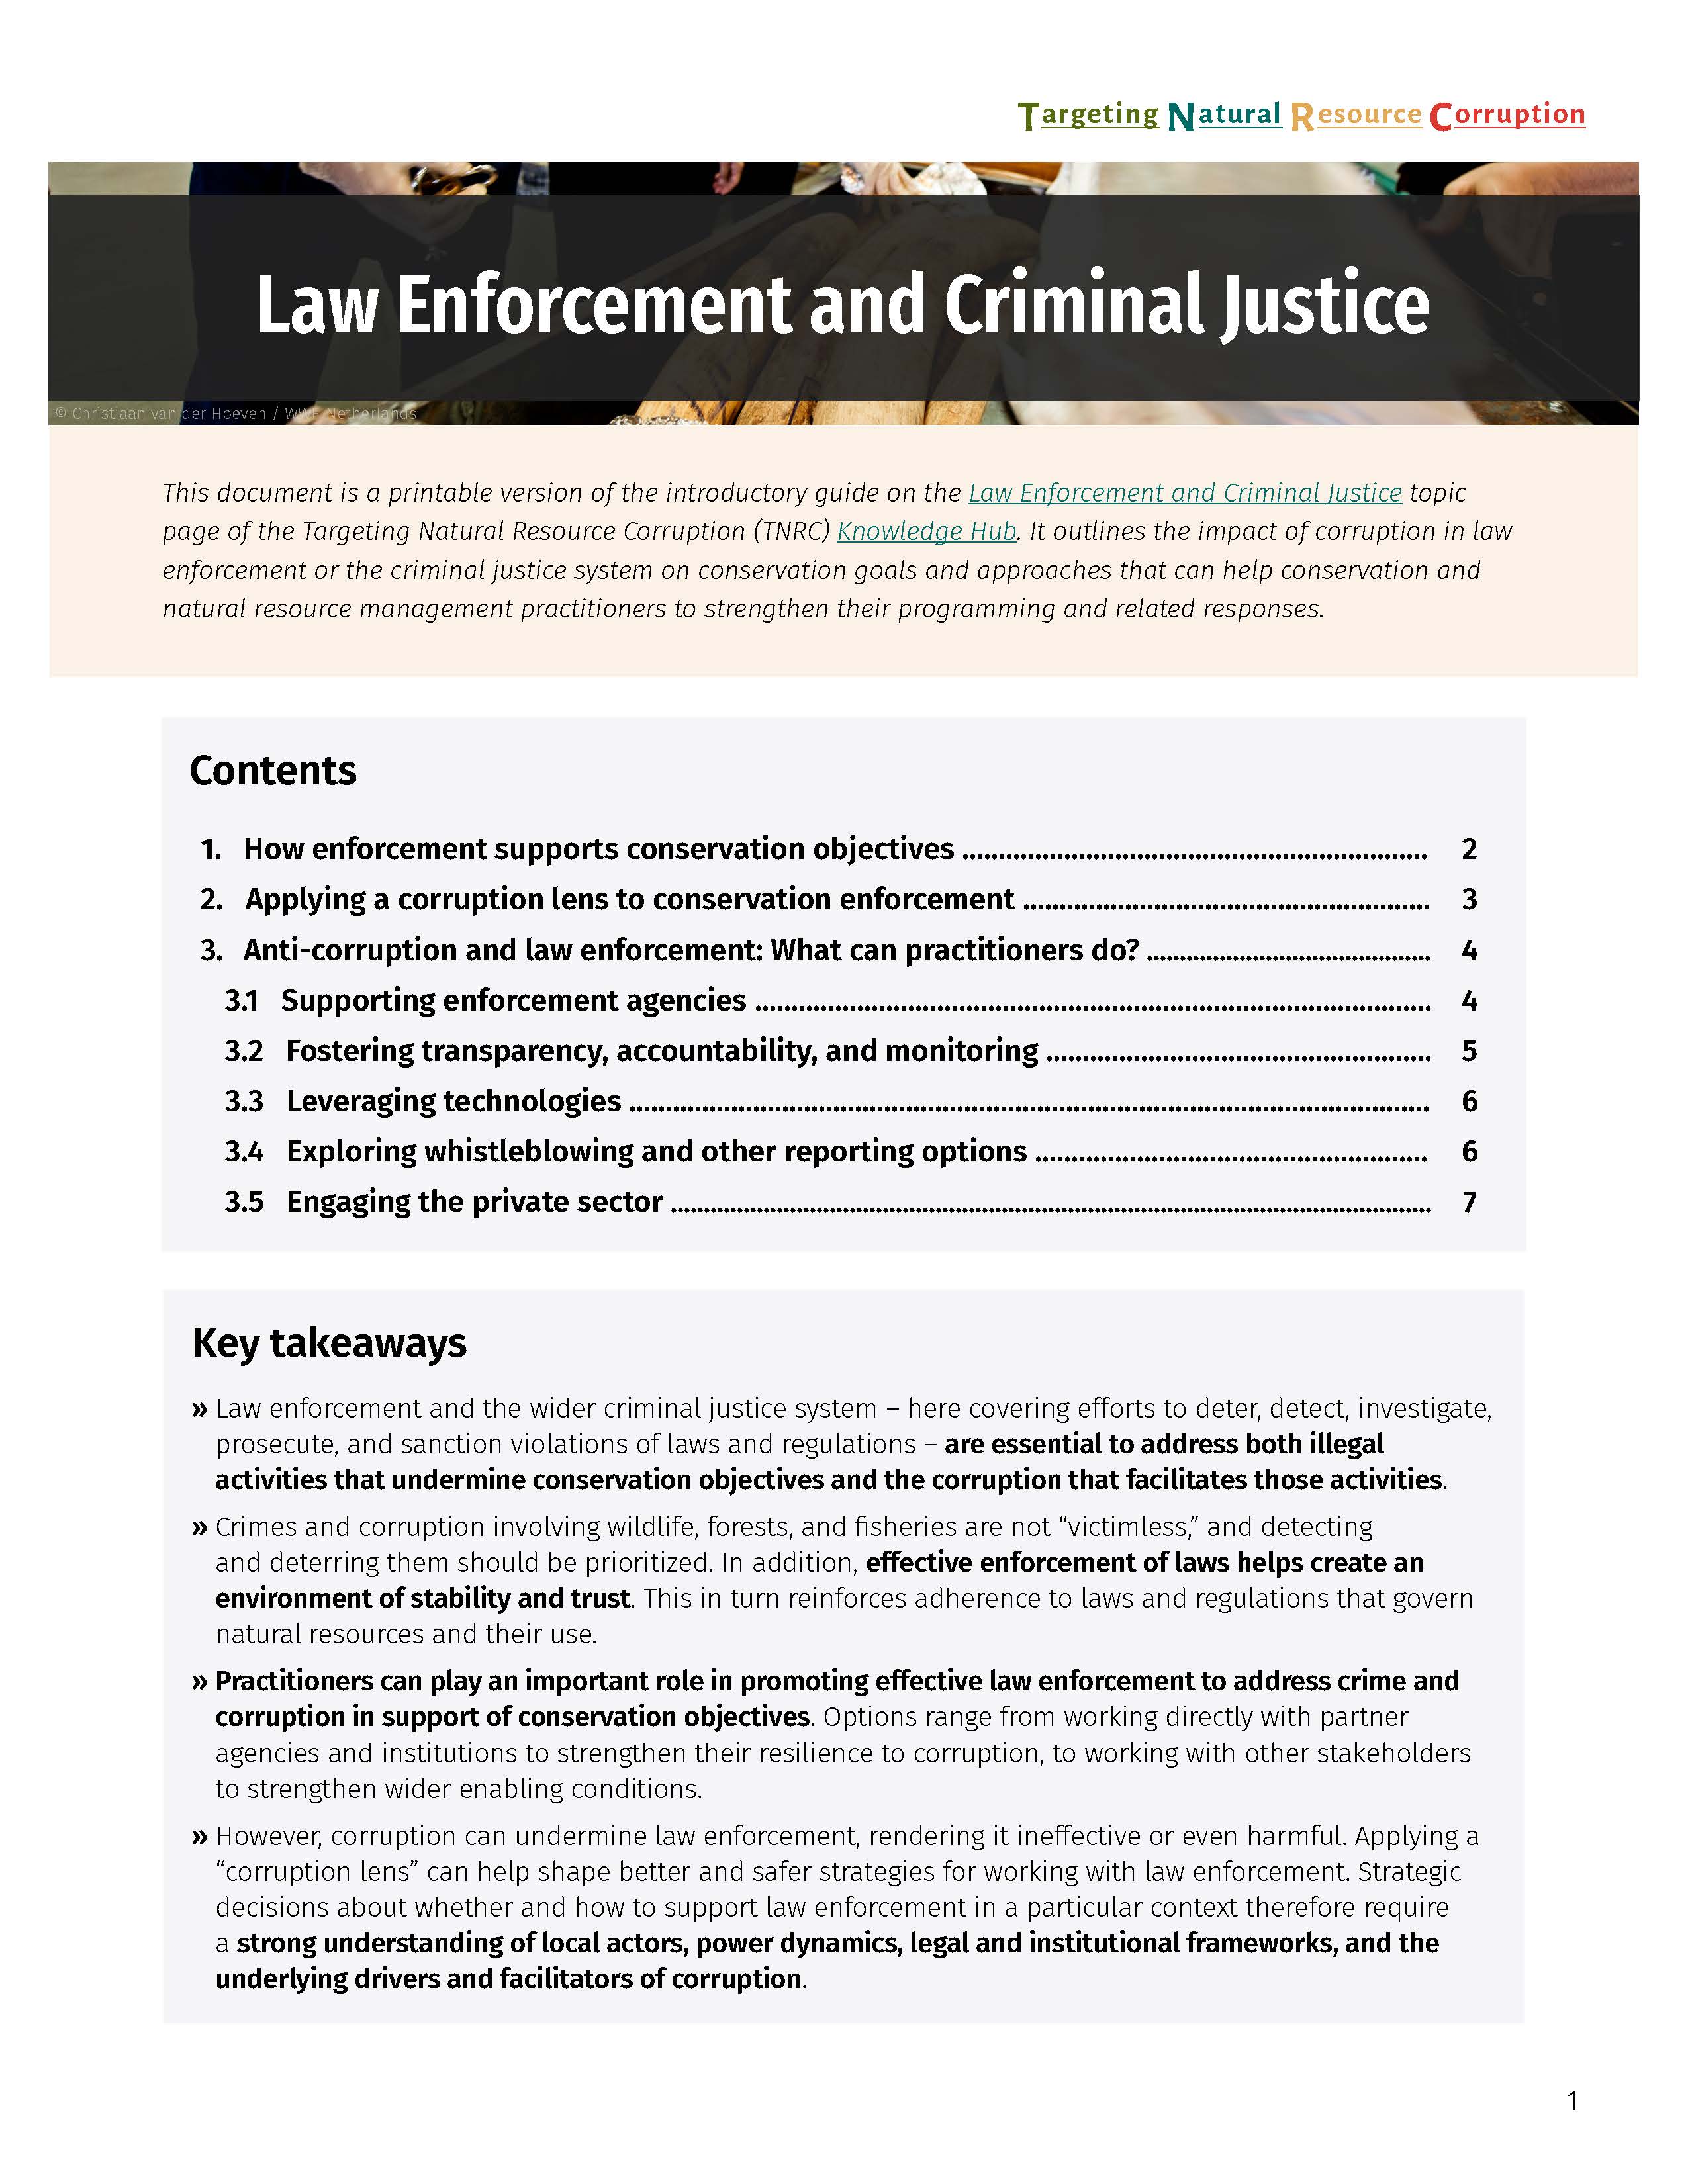 Cover page of TNRC law enforcement synthesis